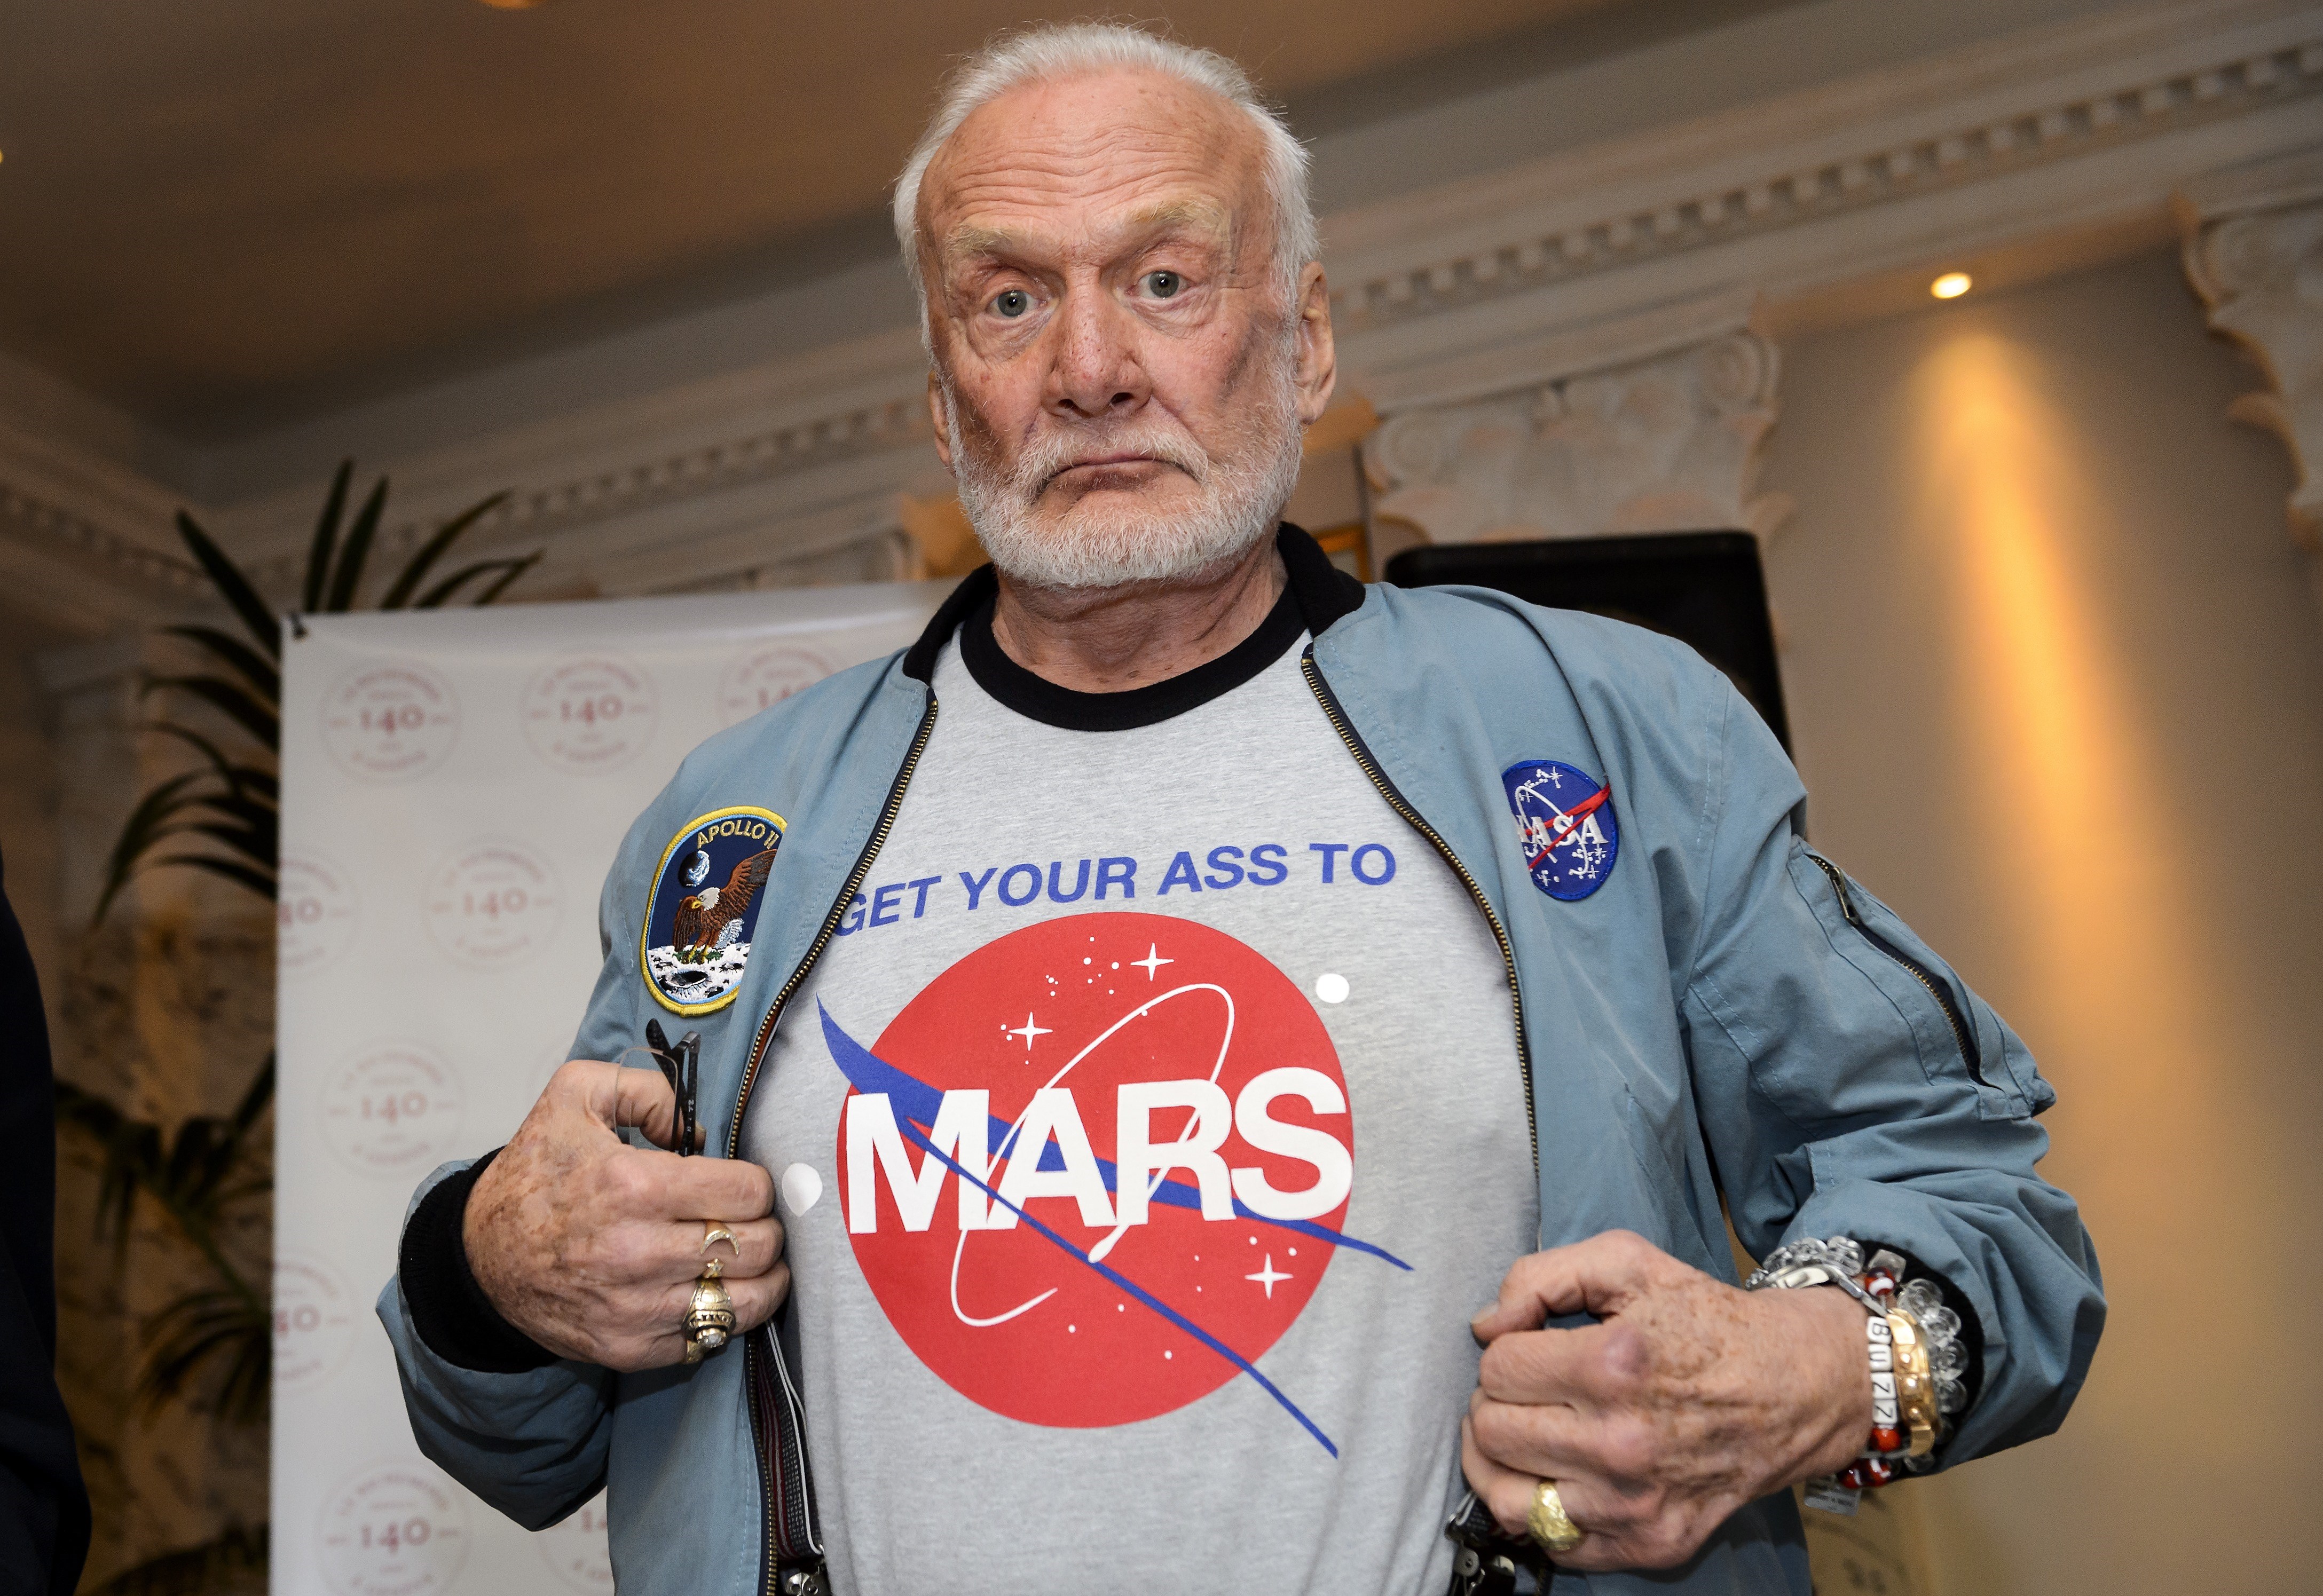 Former NASA astronaut Buzz Aldrin shows the T-shirt he wears promoting Mars exploration on Nov. 12, 2015, in Geneva (Fabrice Coffrini—AFP/Getty Images)